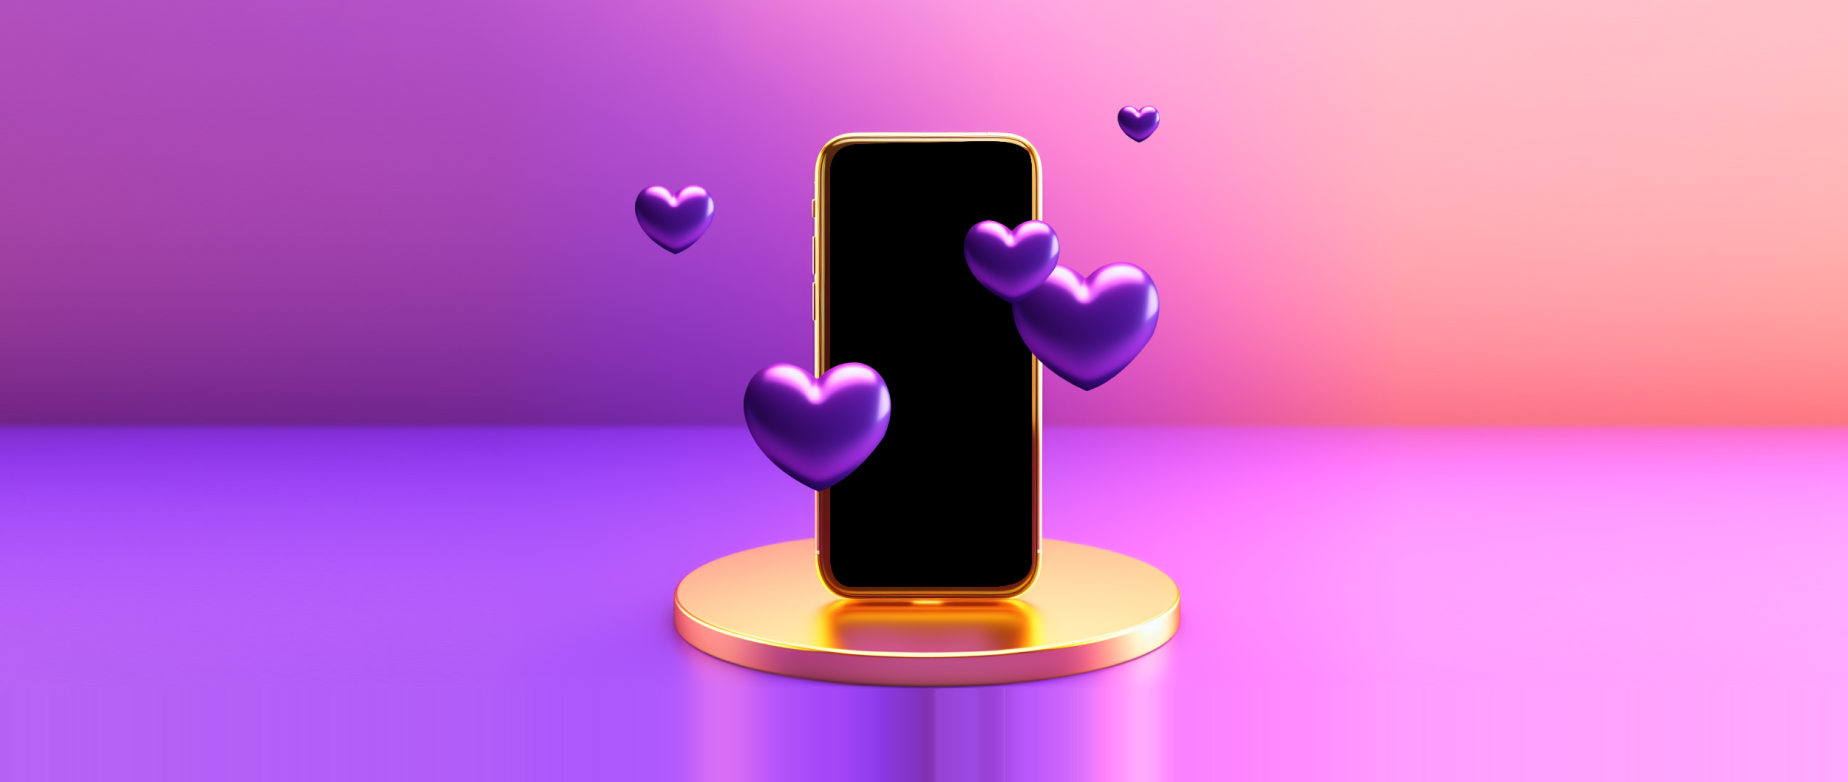 Graphic of a mobile phone with heart shapes bubbles floating around it